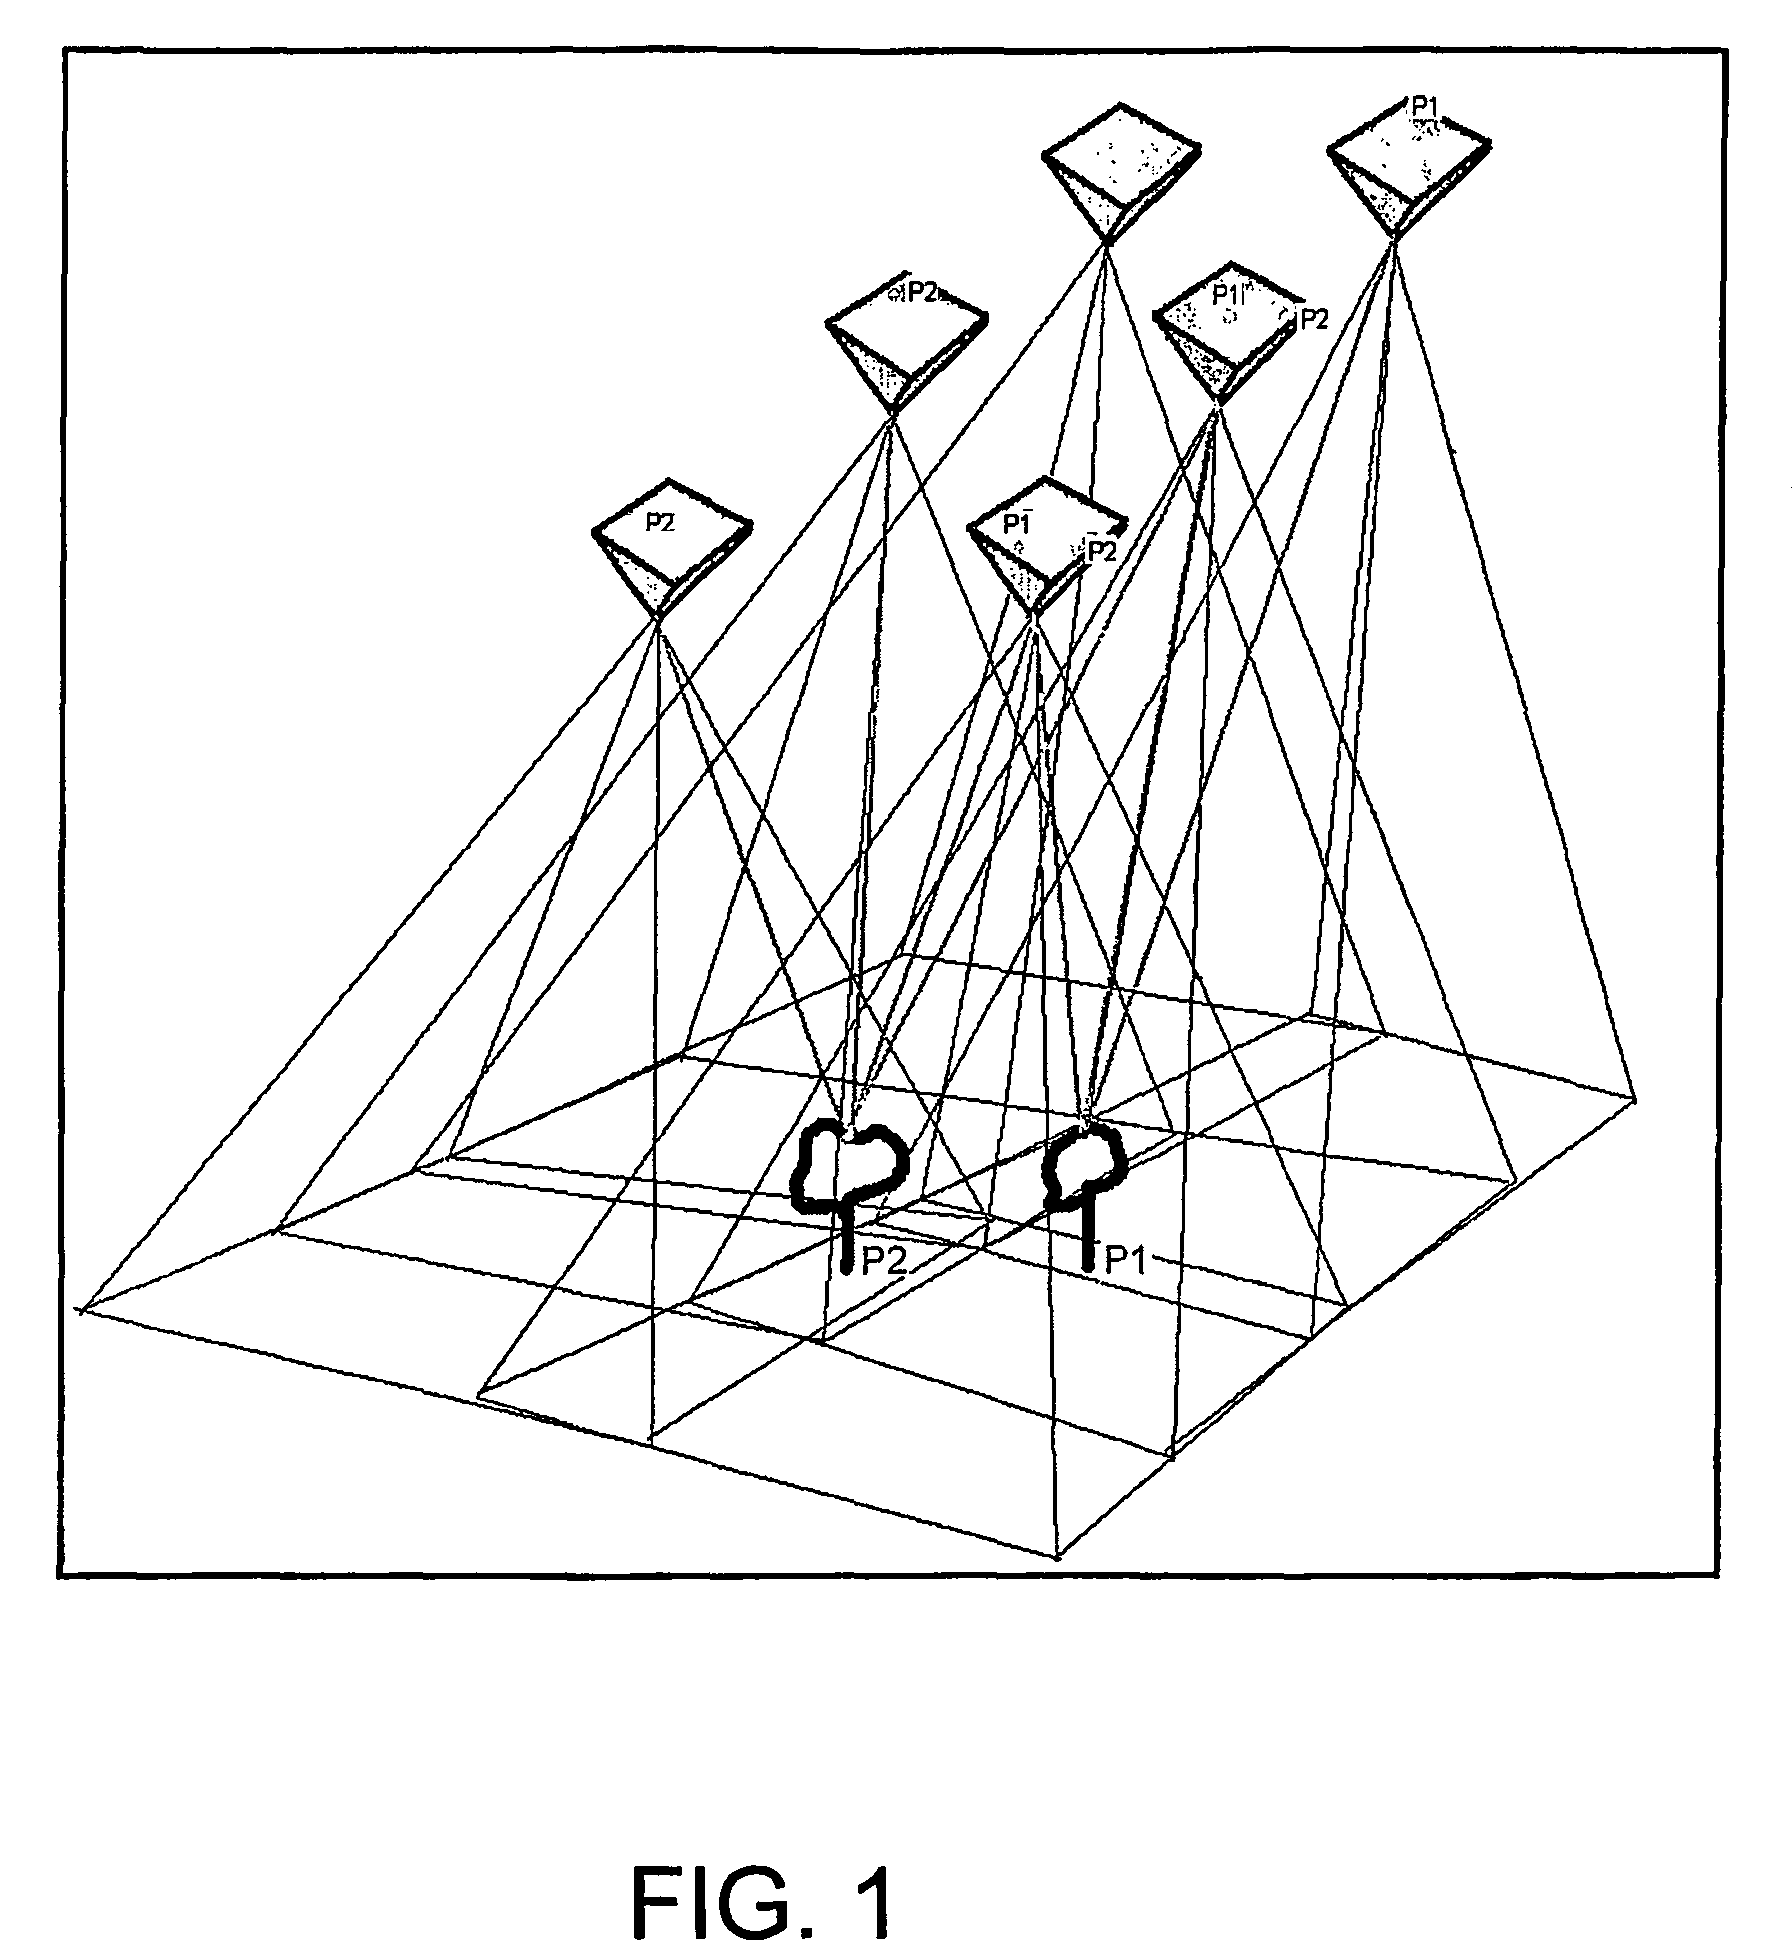 Method for determination of stand attributes and a computer program for performing the method